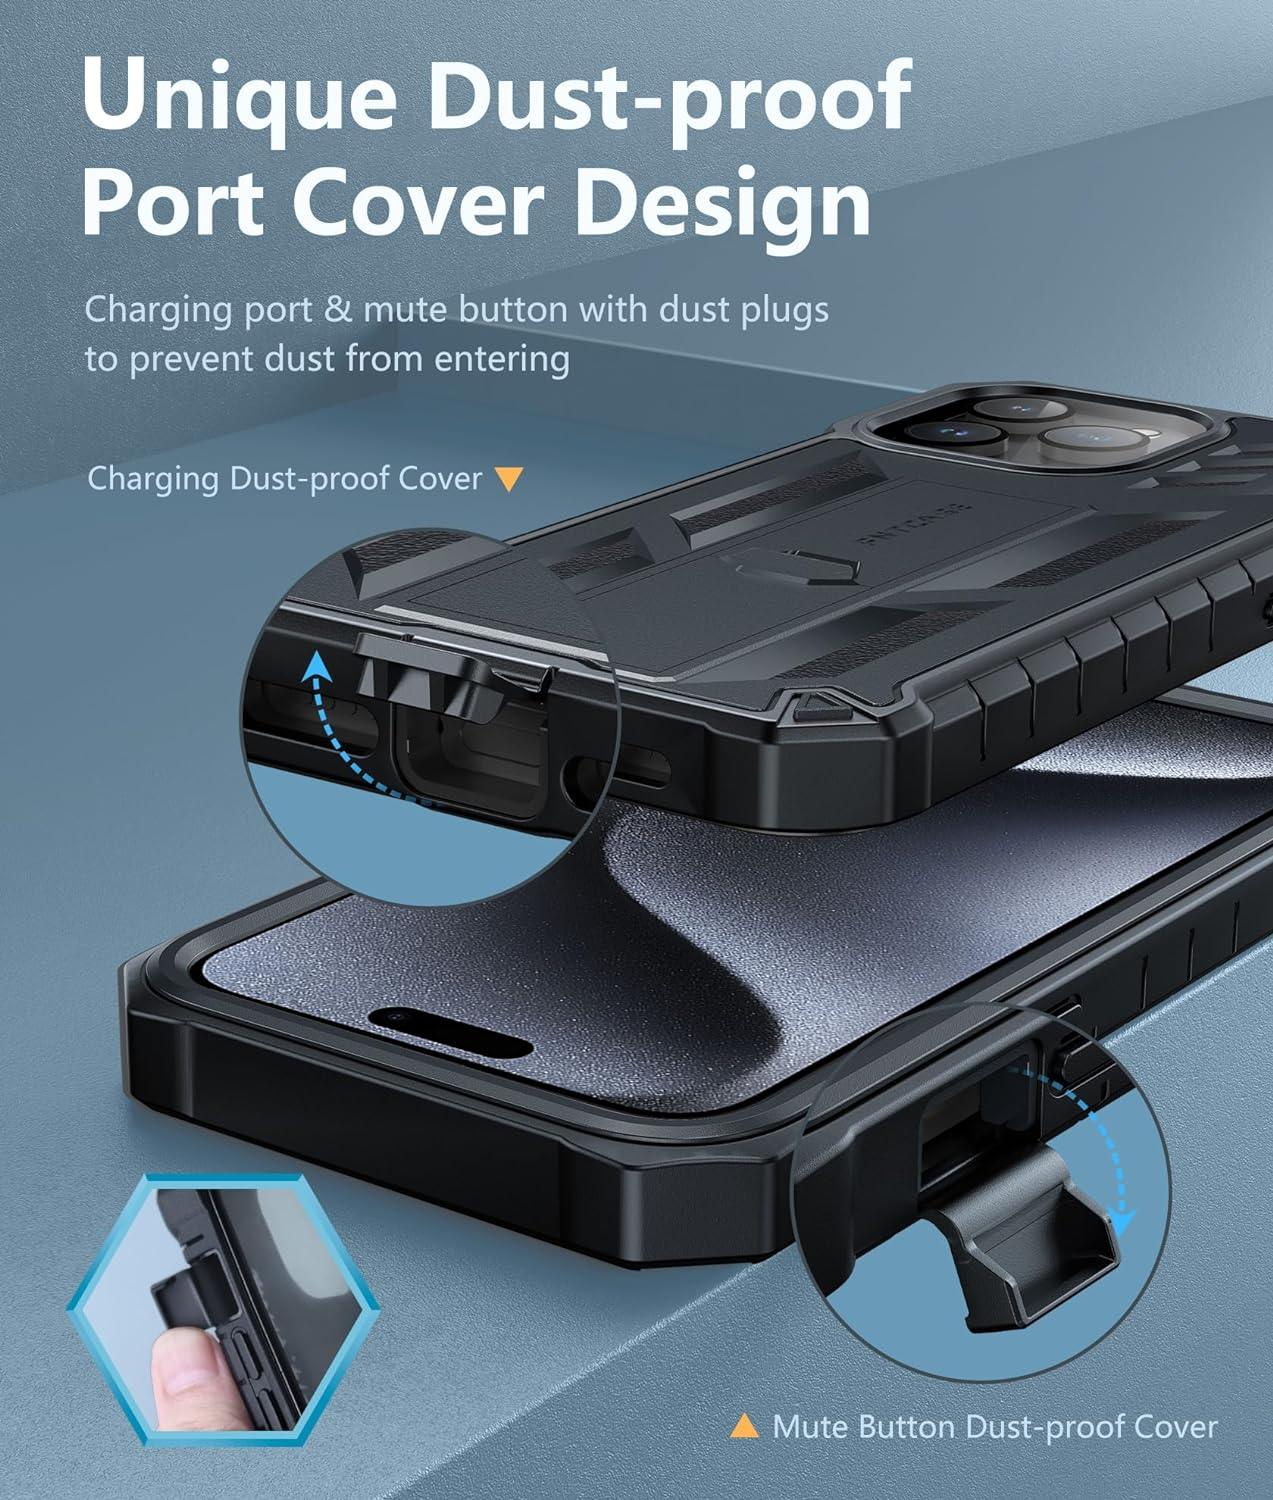 iPhone 15 Pro Max Phone Cover with Belt Clip FNTCASE